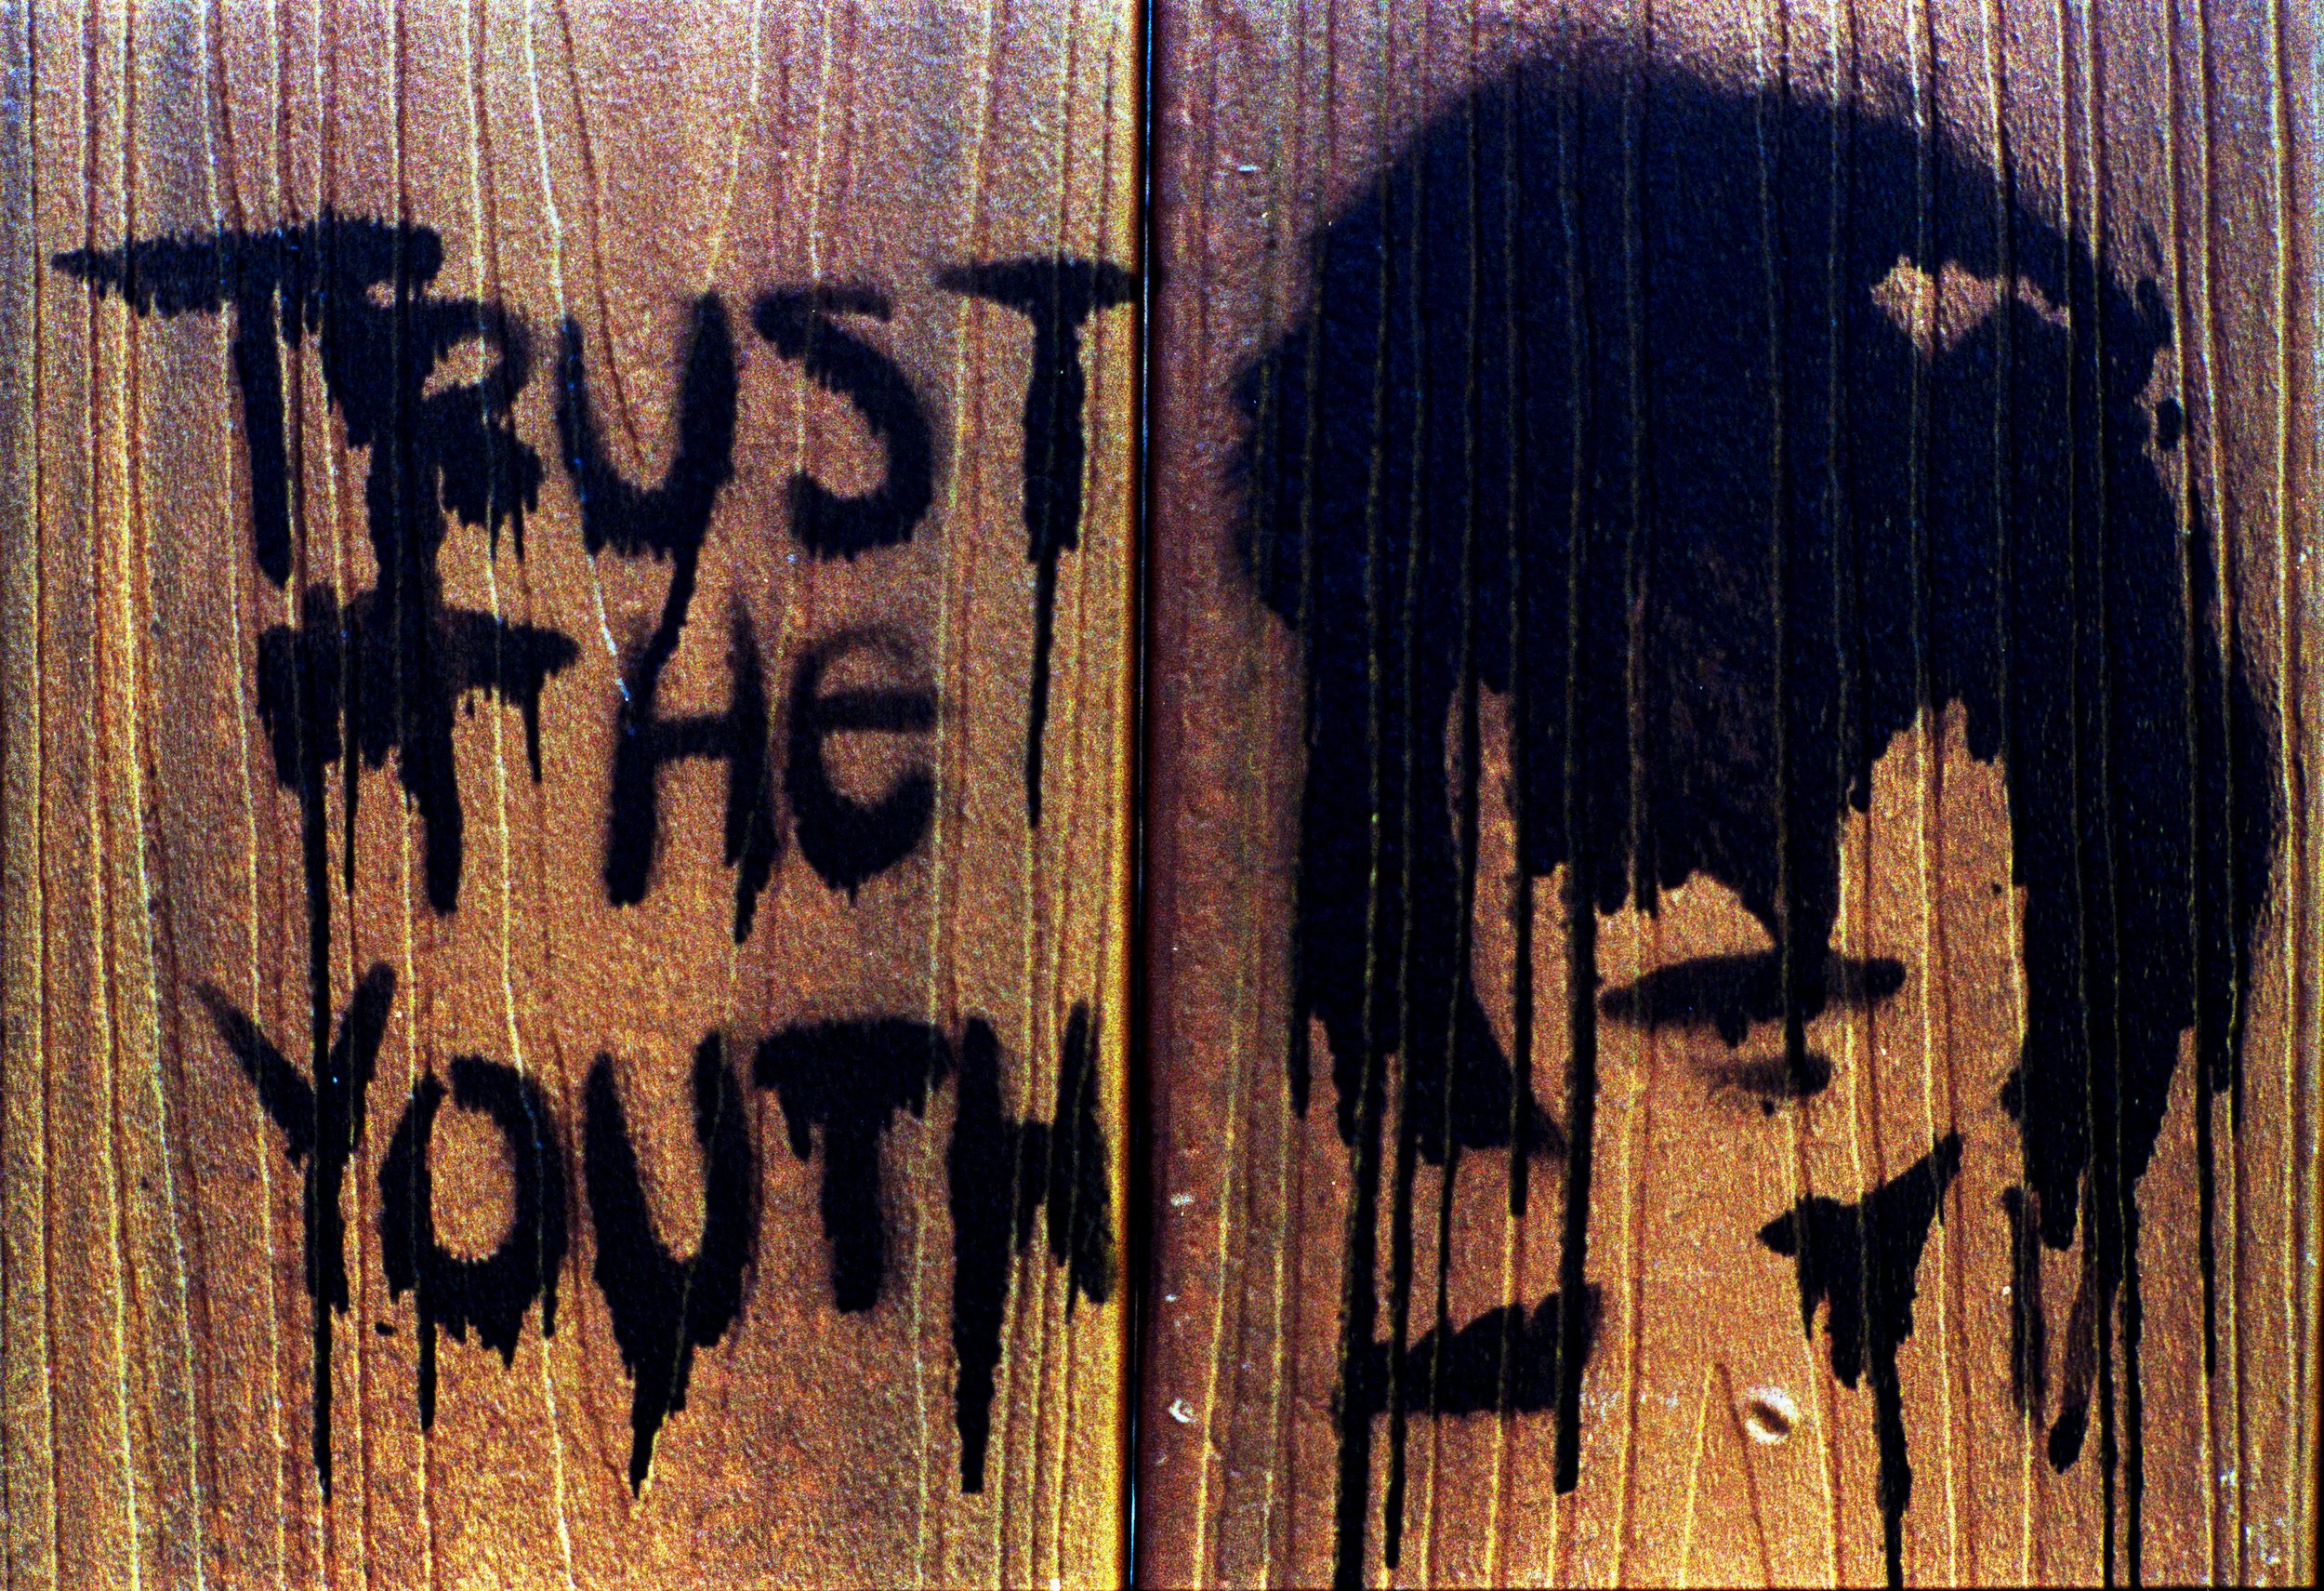 Joe Trust the Youth Stencil Cropped Glover Park DC Color Film copy.jpg